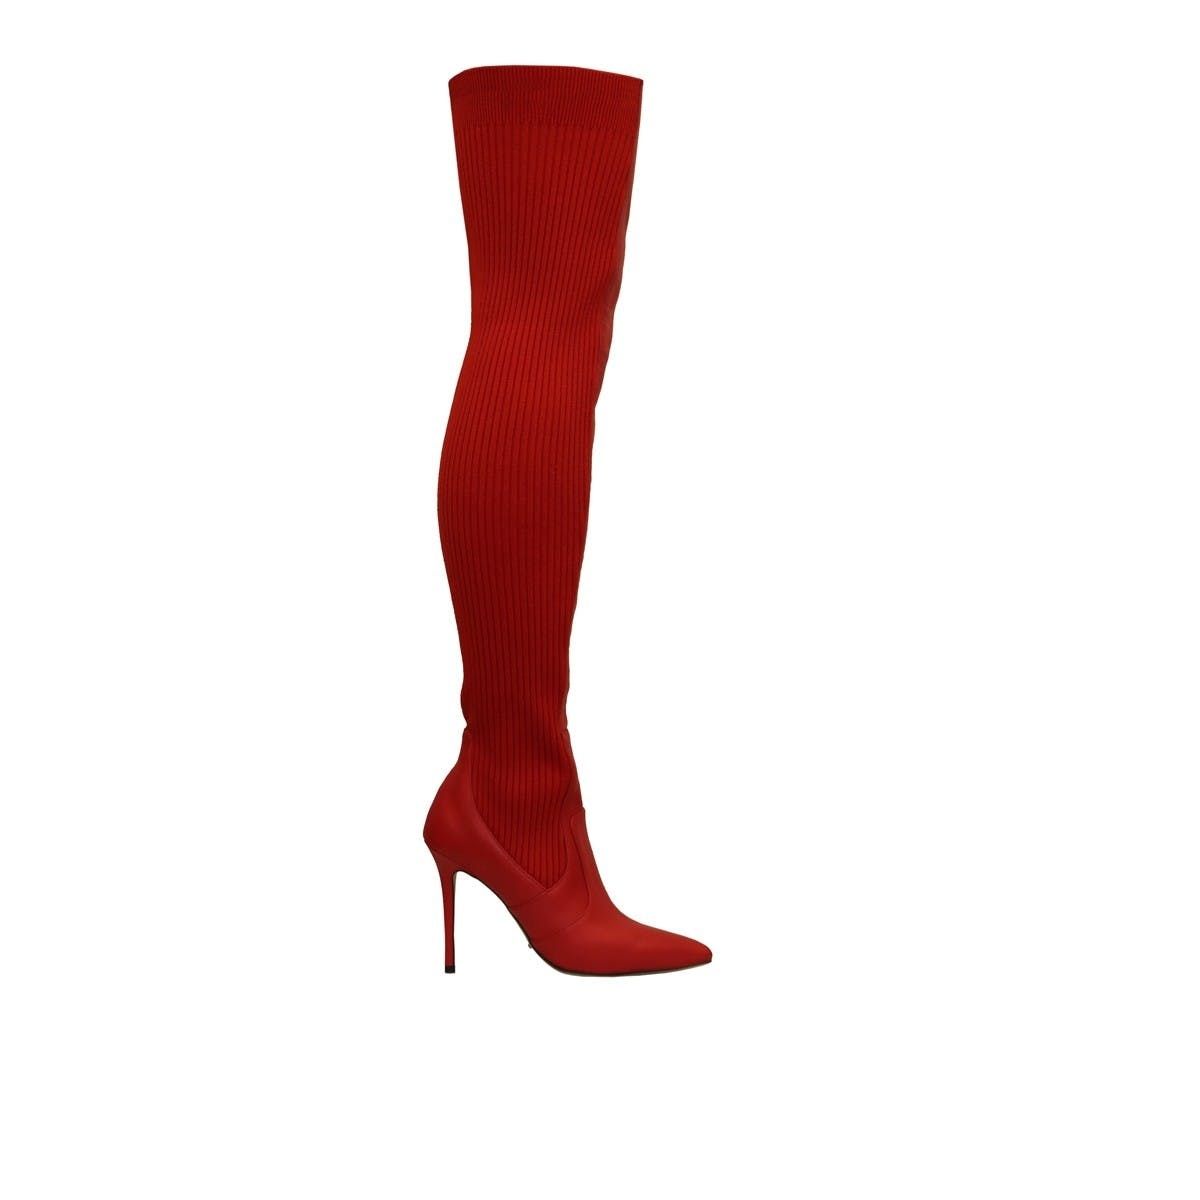 10 Over-the-Knee Boots That Go With Everything This Fall